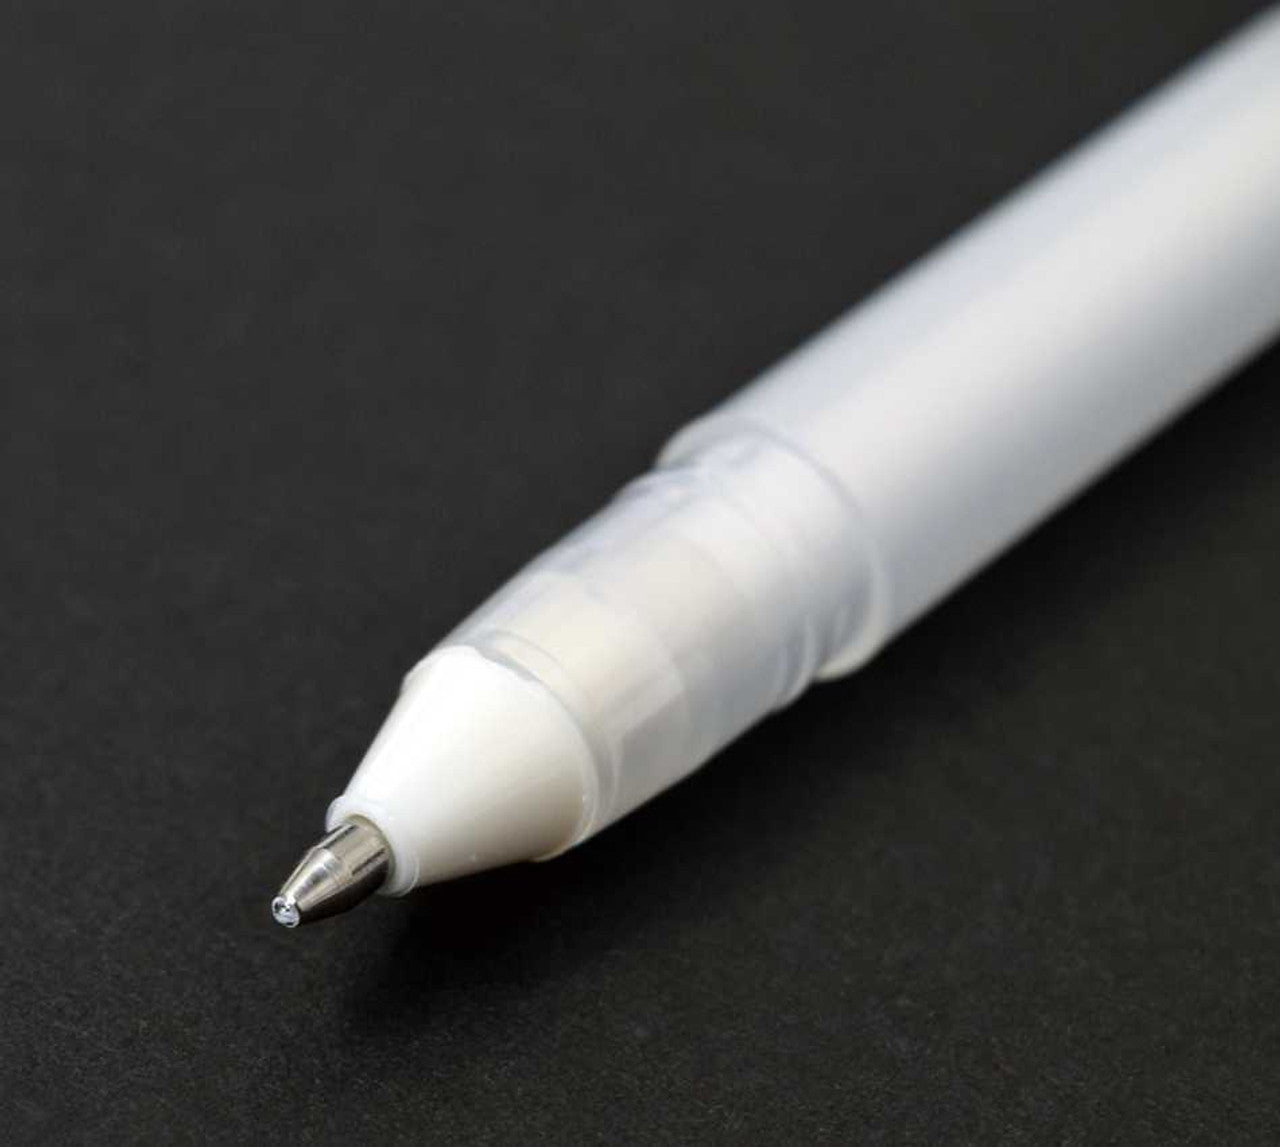 Classic Gelly Roll Pen White